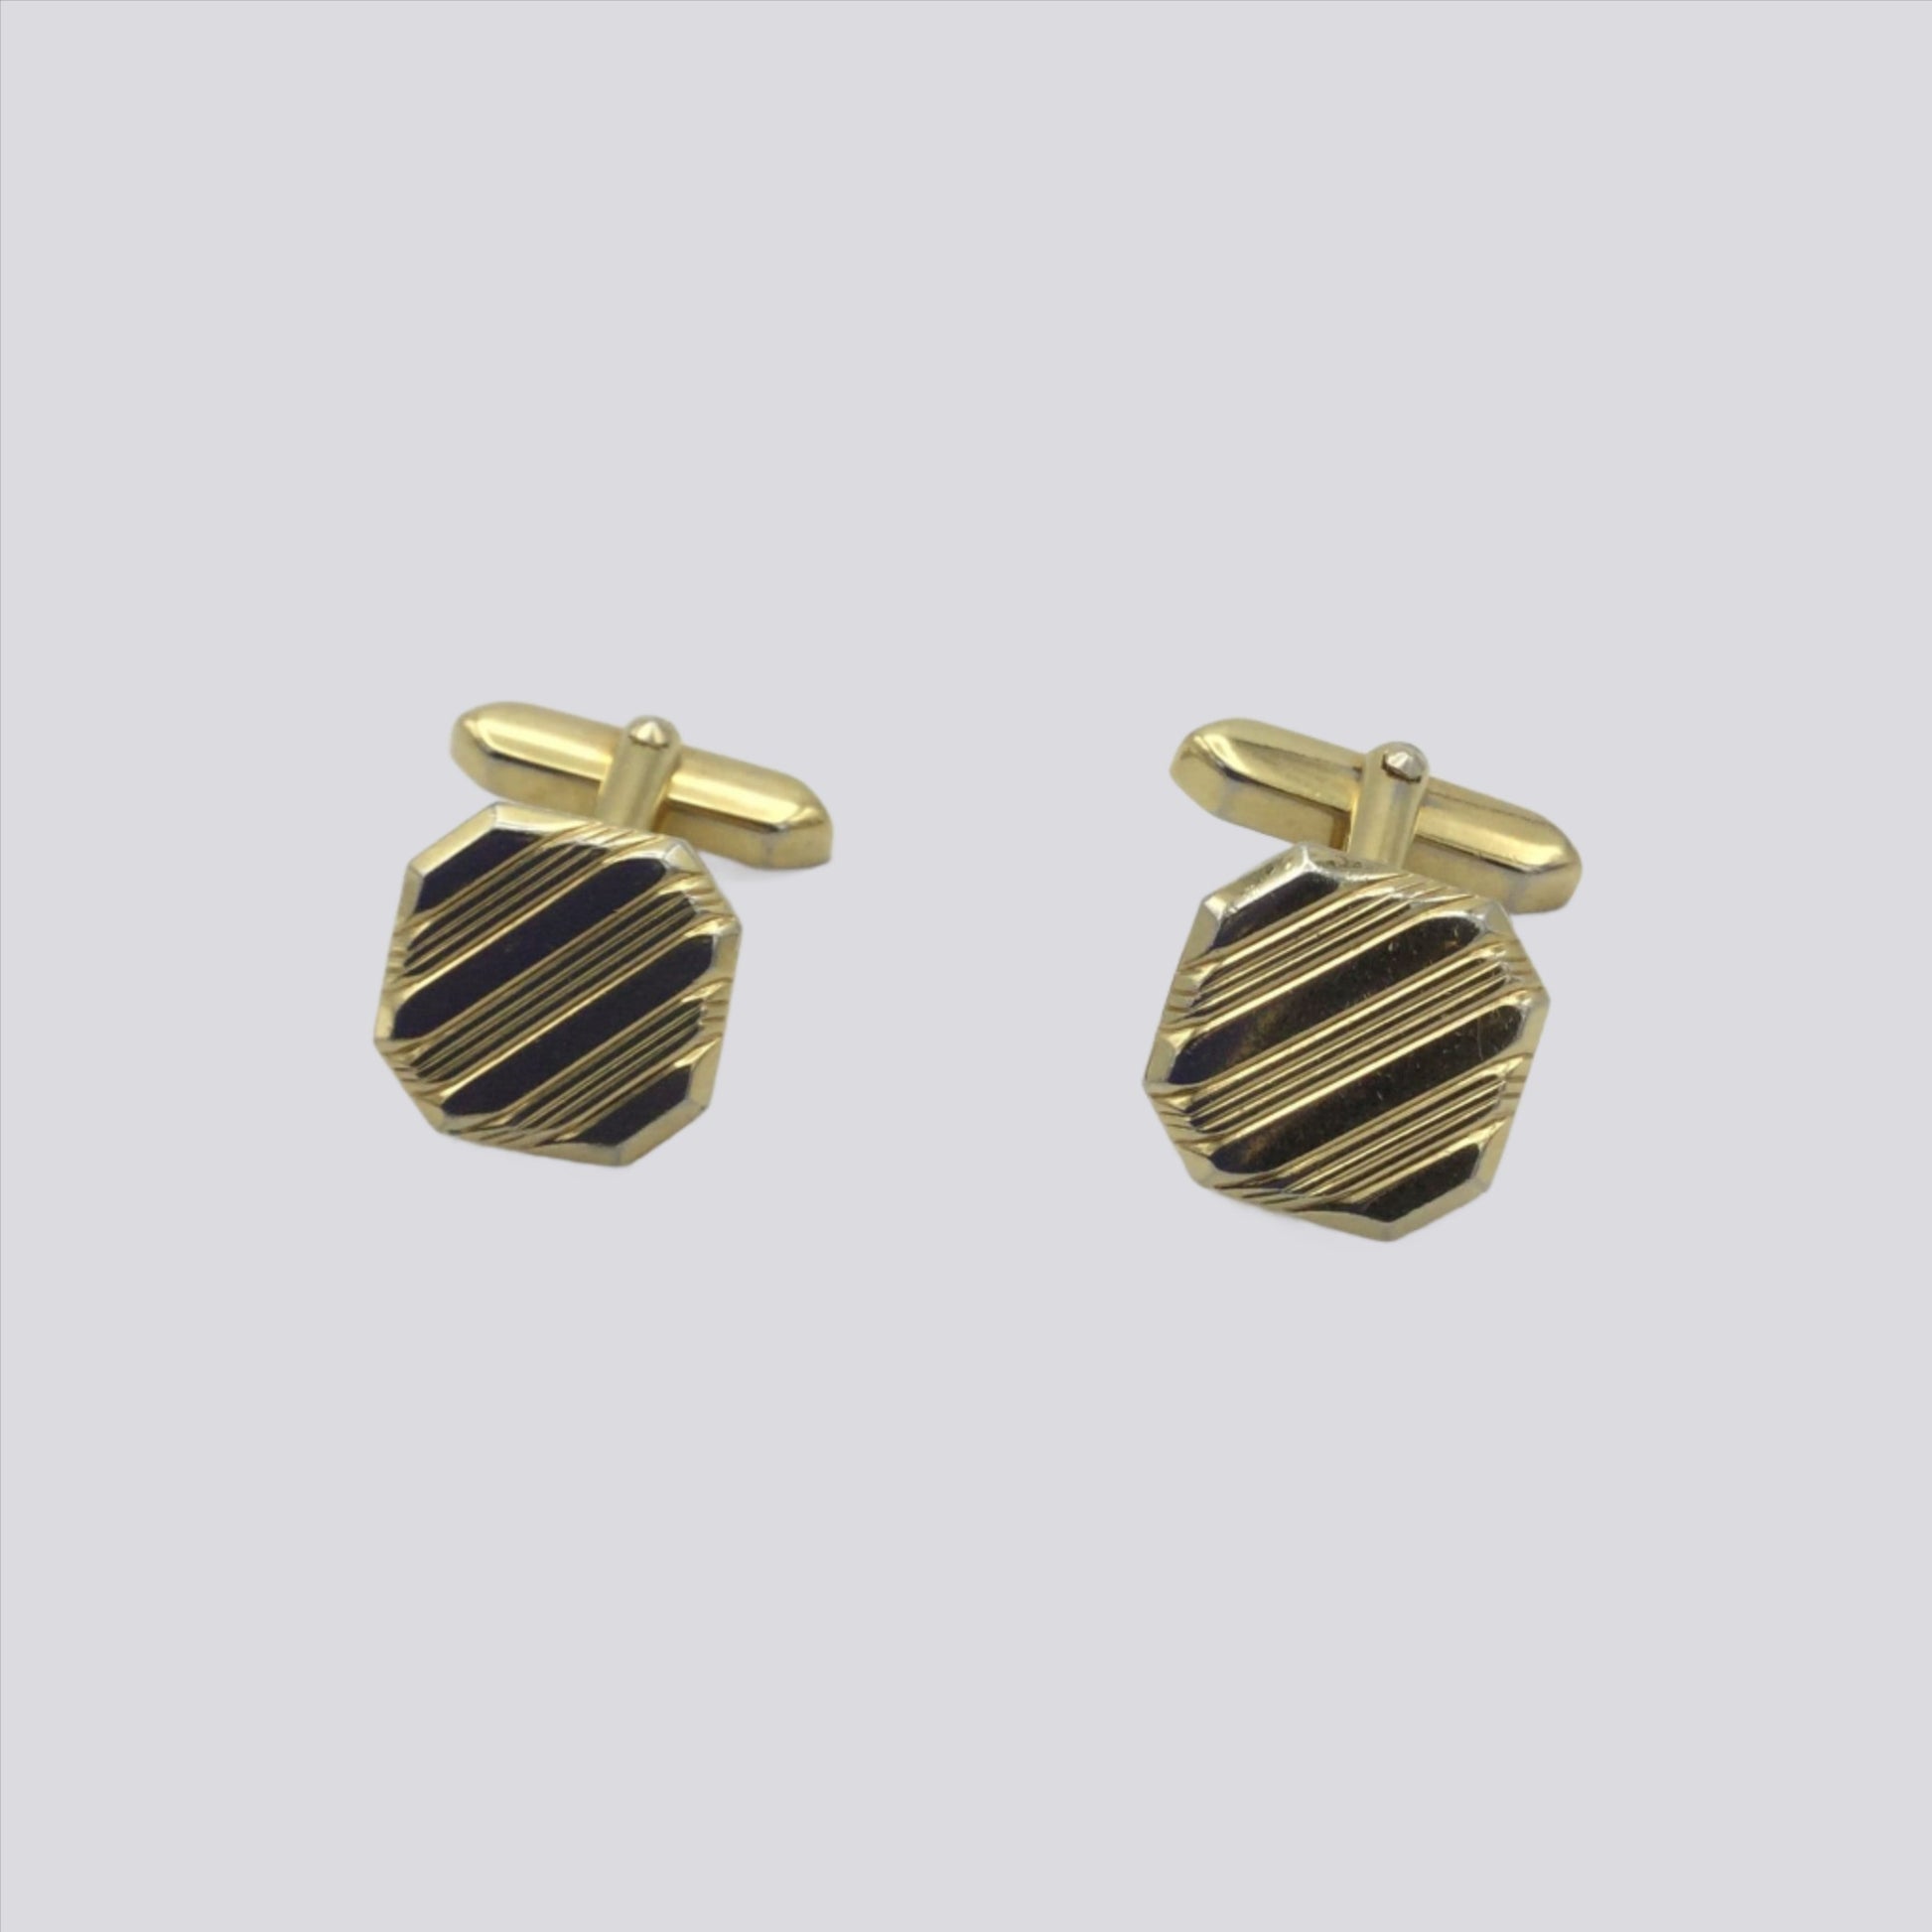 Gilded square cufflinks with a striped pattern on a white background